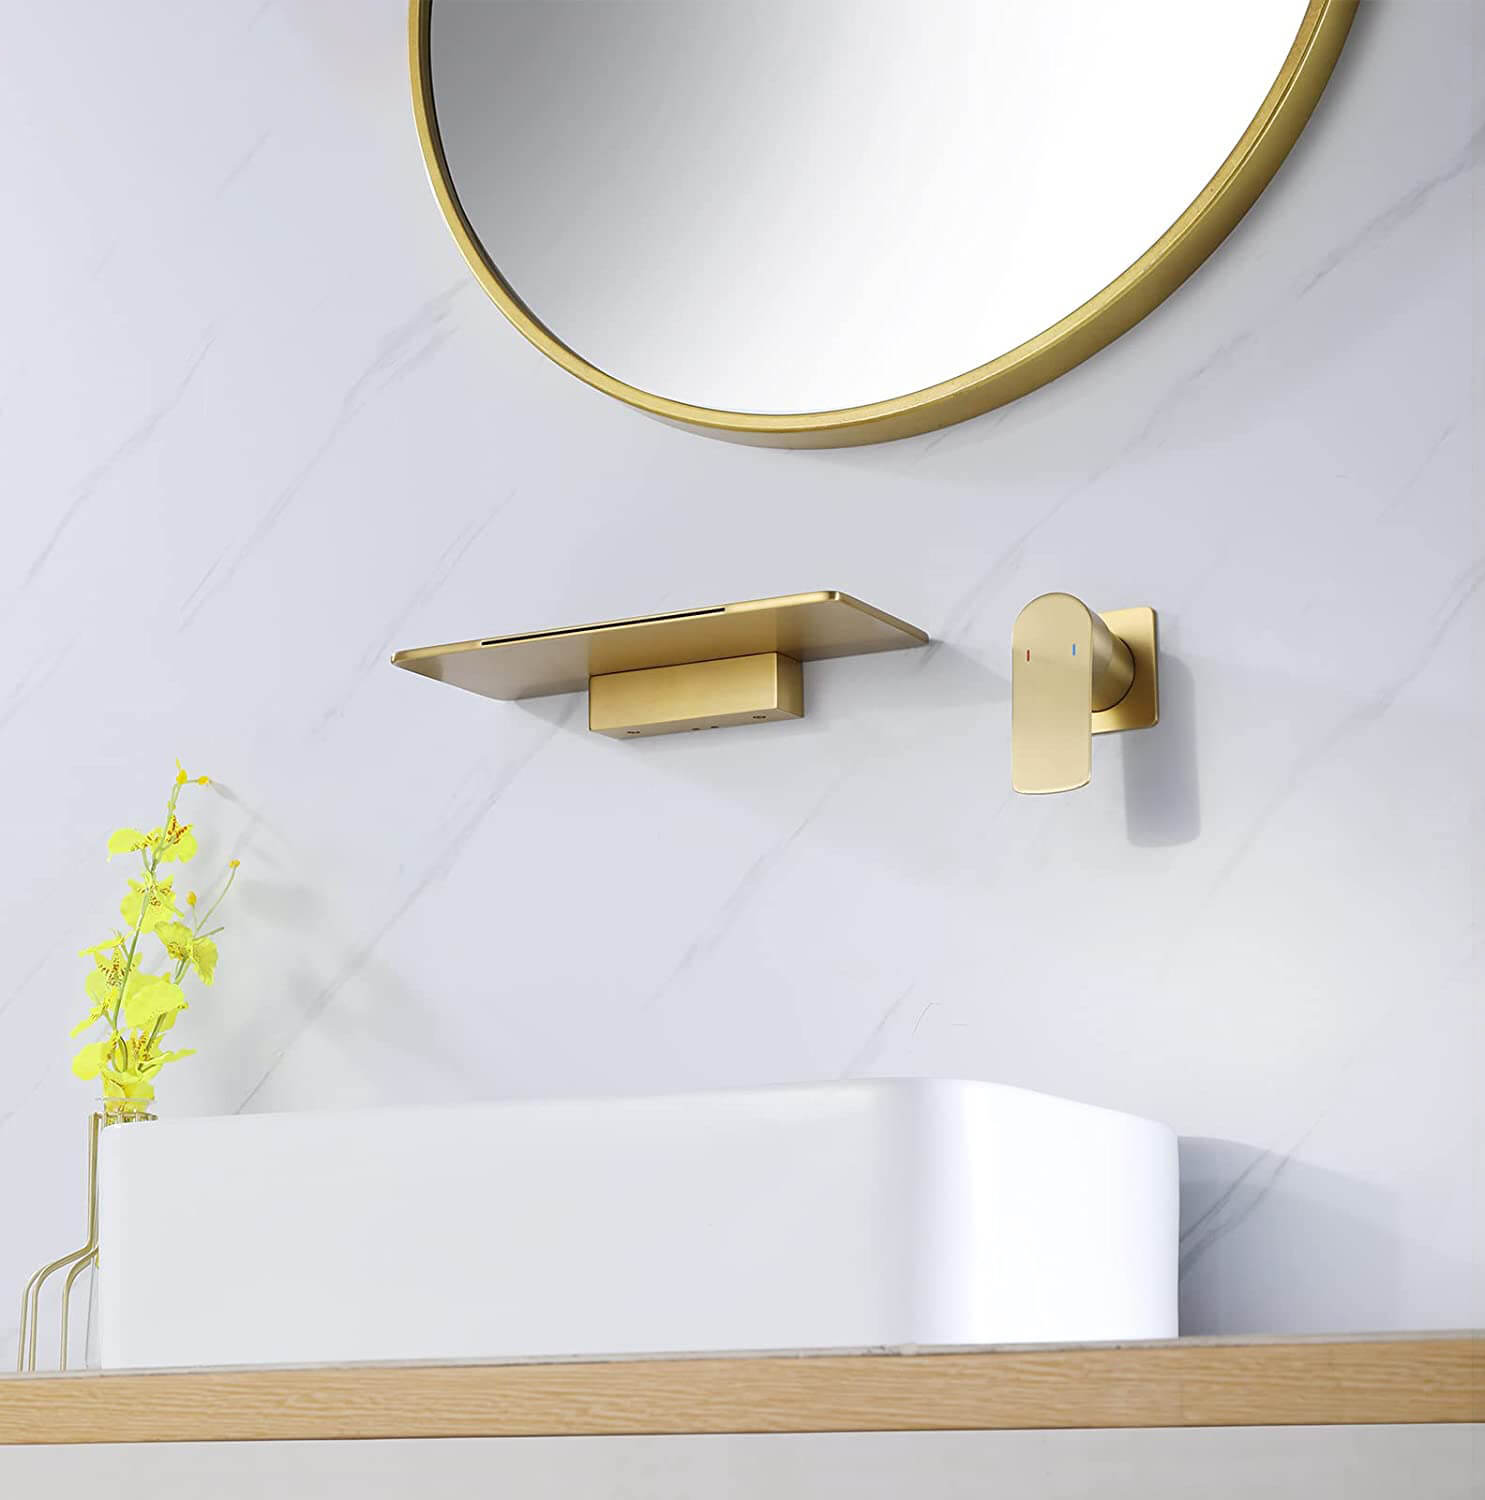 wowow wall mount waterfall brushed brass bathroom faucet